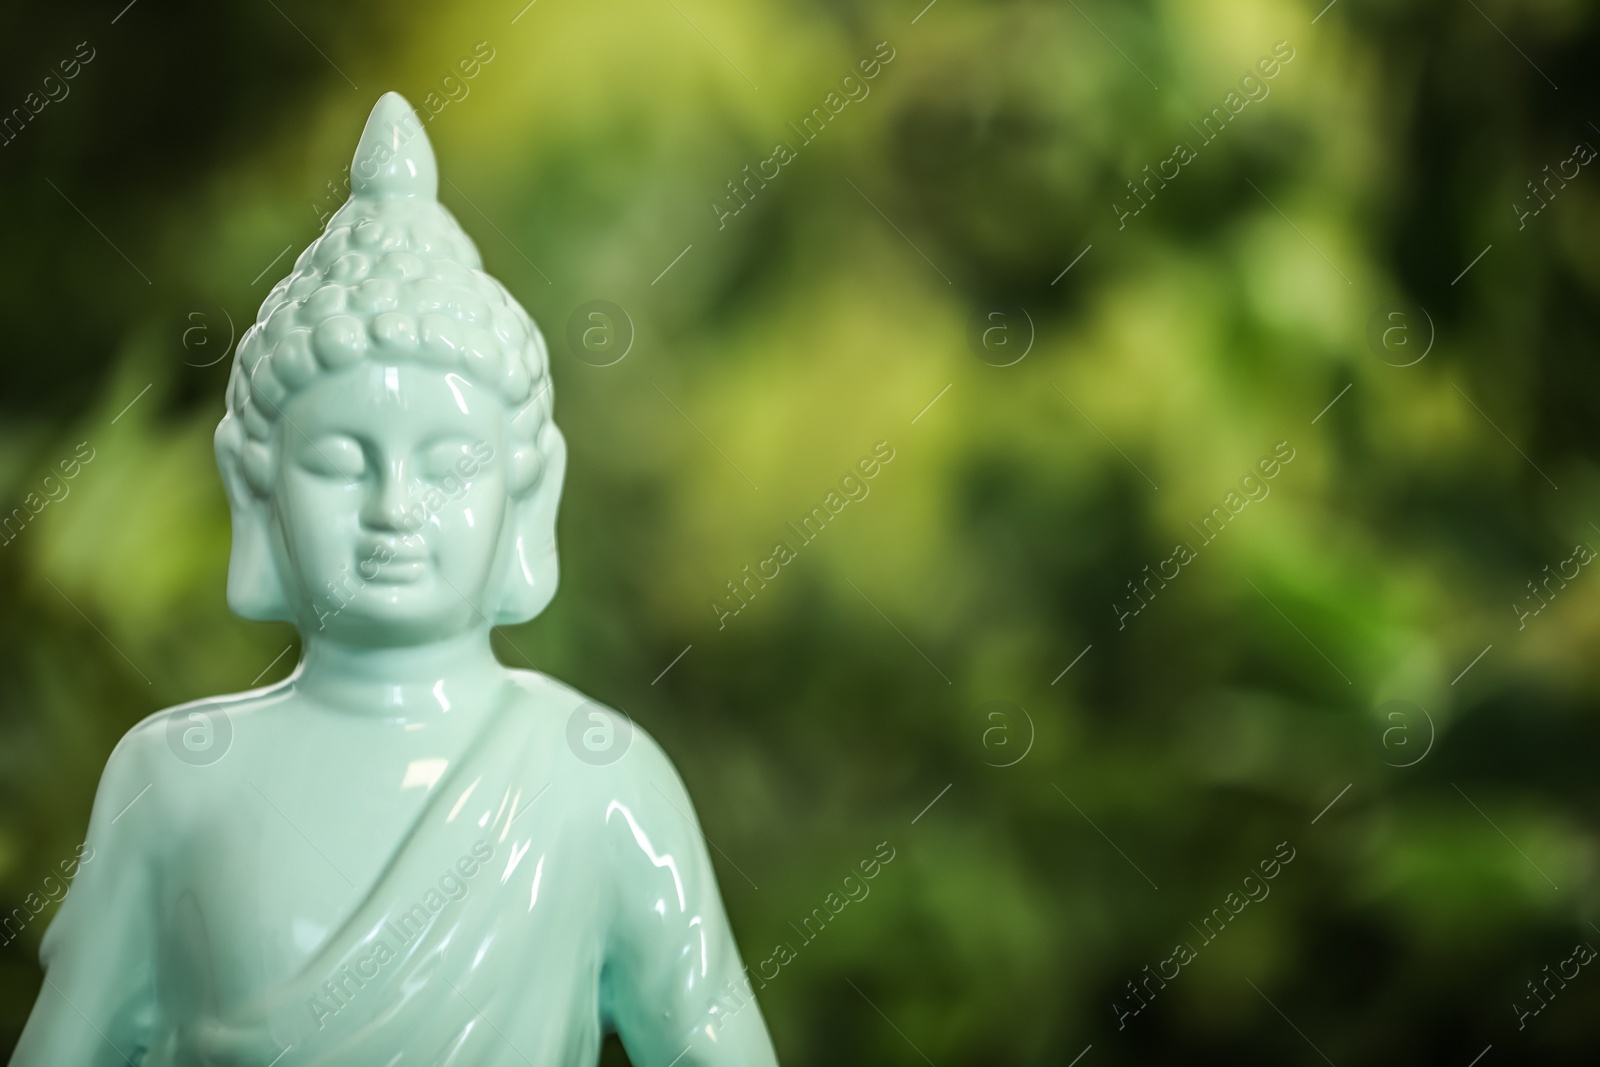 Photo of Buddha statue against blurred green background, closeup. Space for text